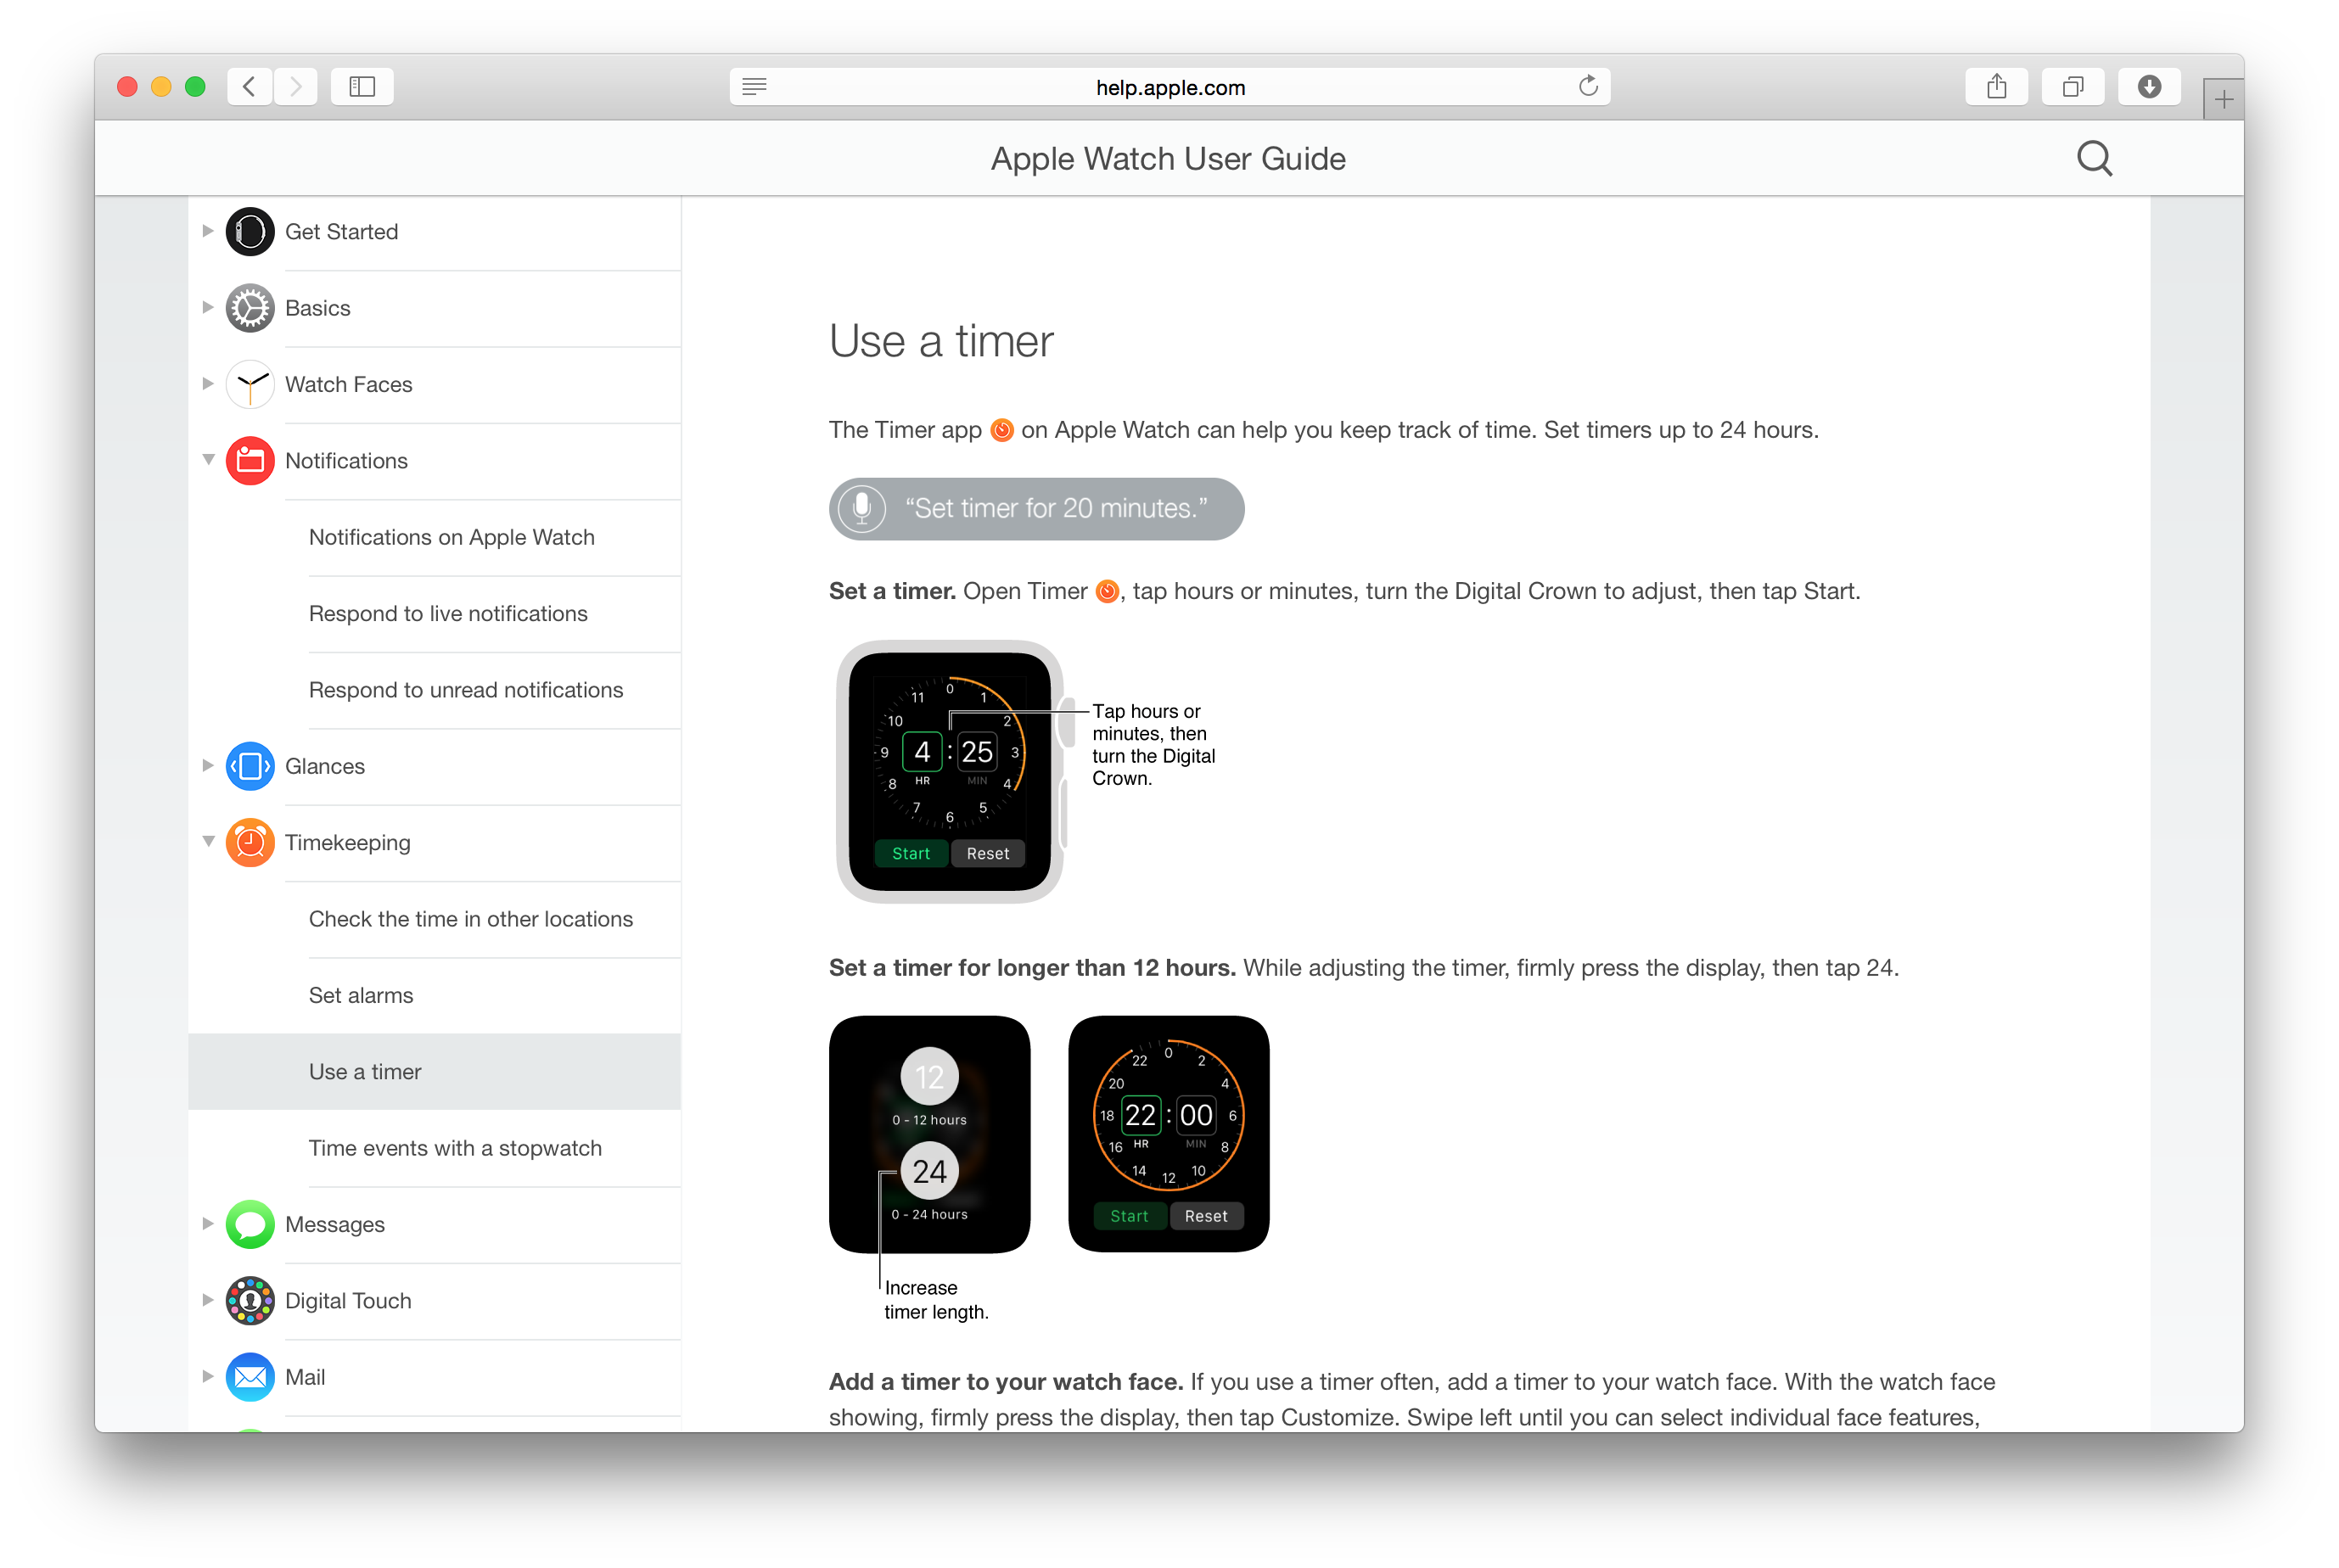 Apple publishes the Apple Watch User Guide online